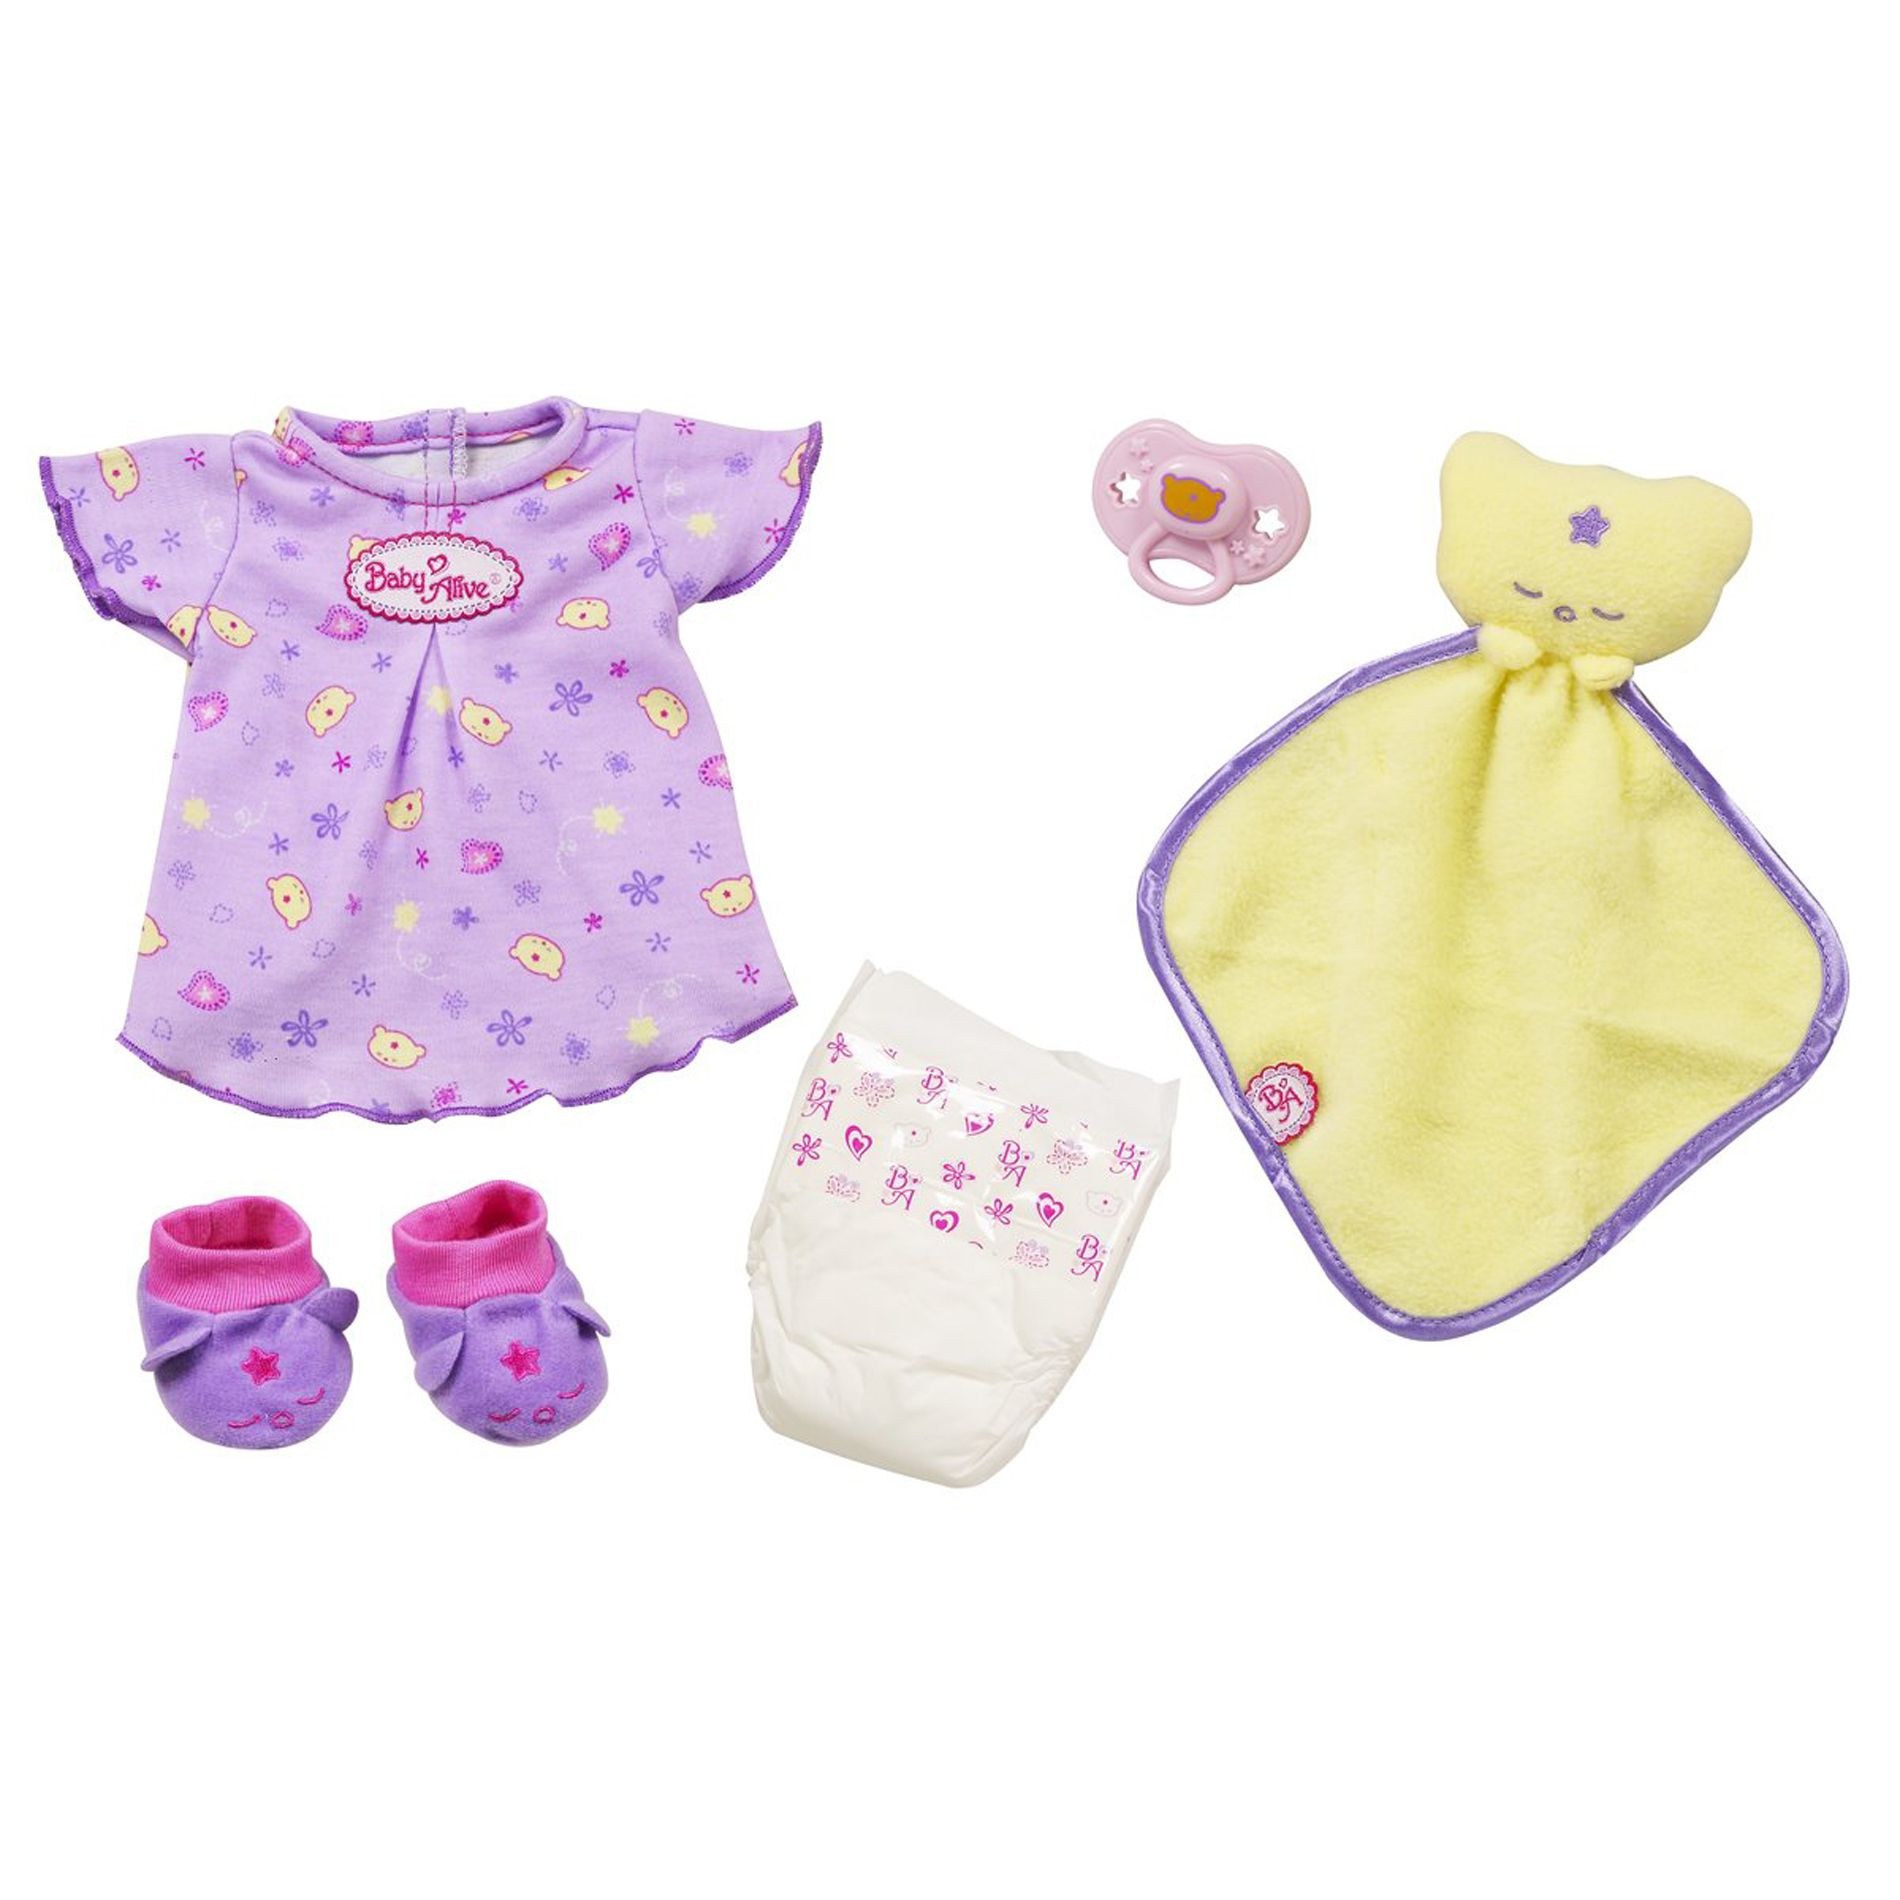 The 24 Best Ideas for Baby Alive Fashion Set - Home, Family, Style and ...